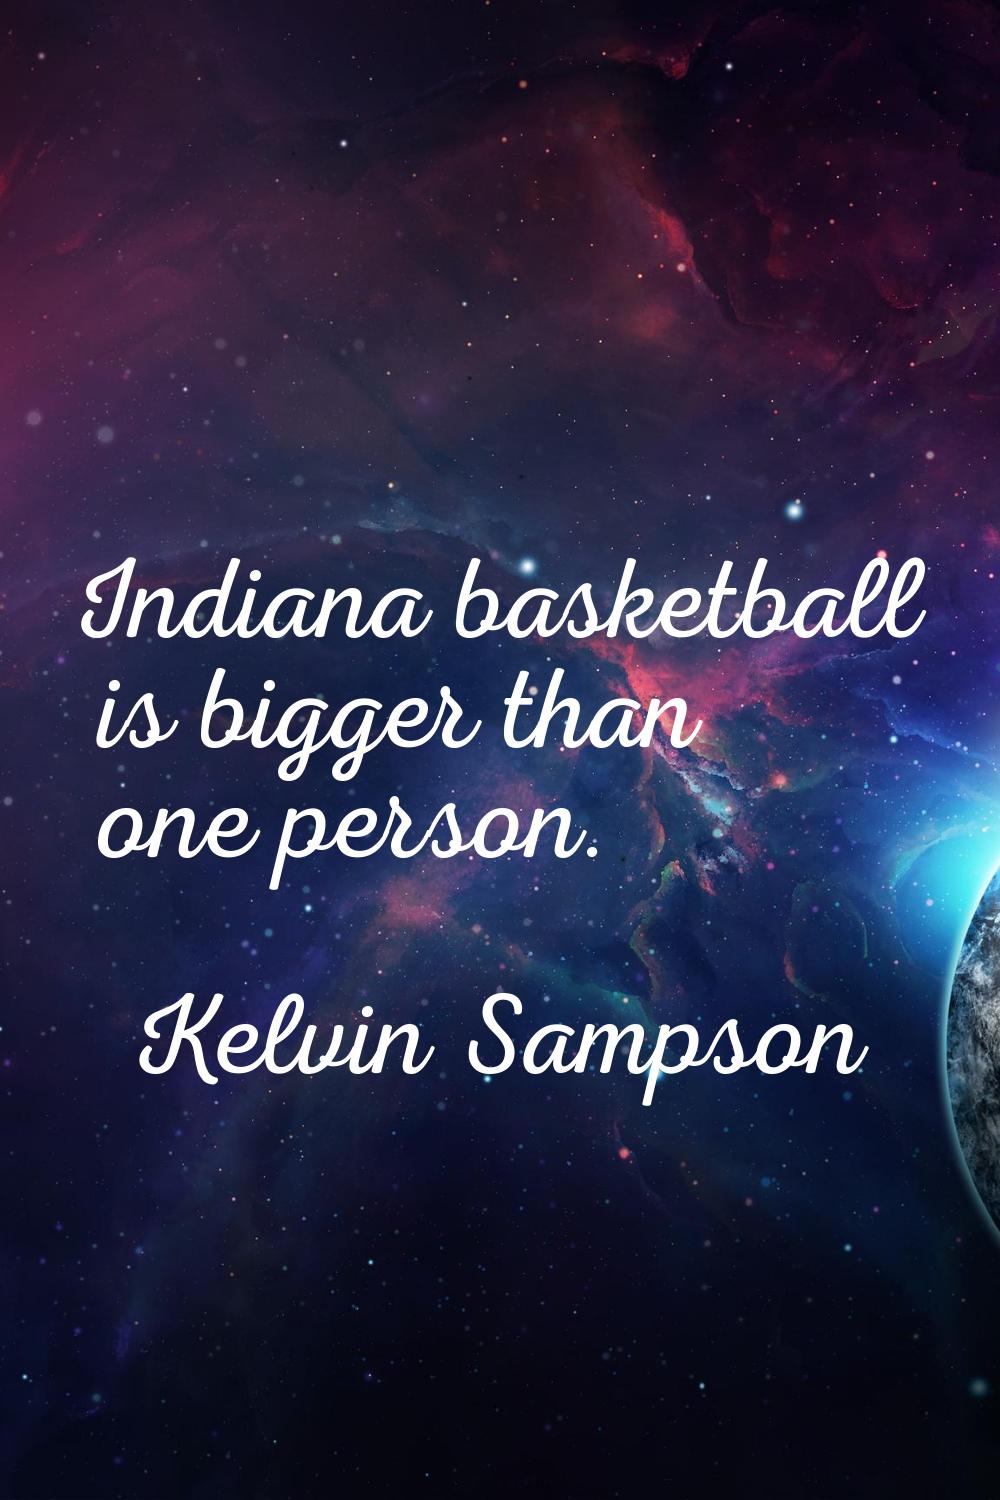 Indiana basketball is bigger than one person.